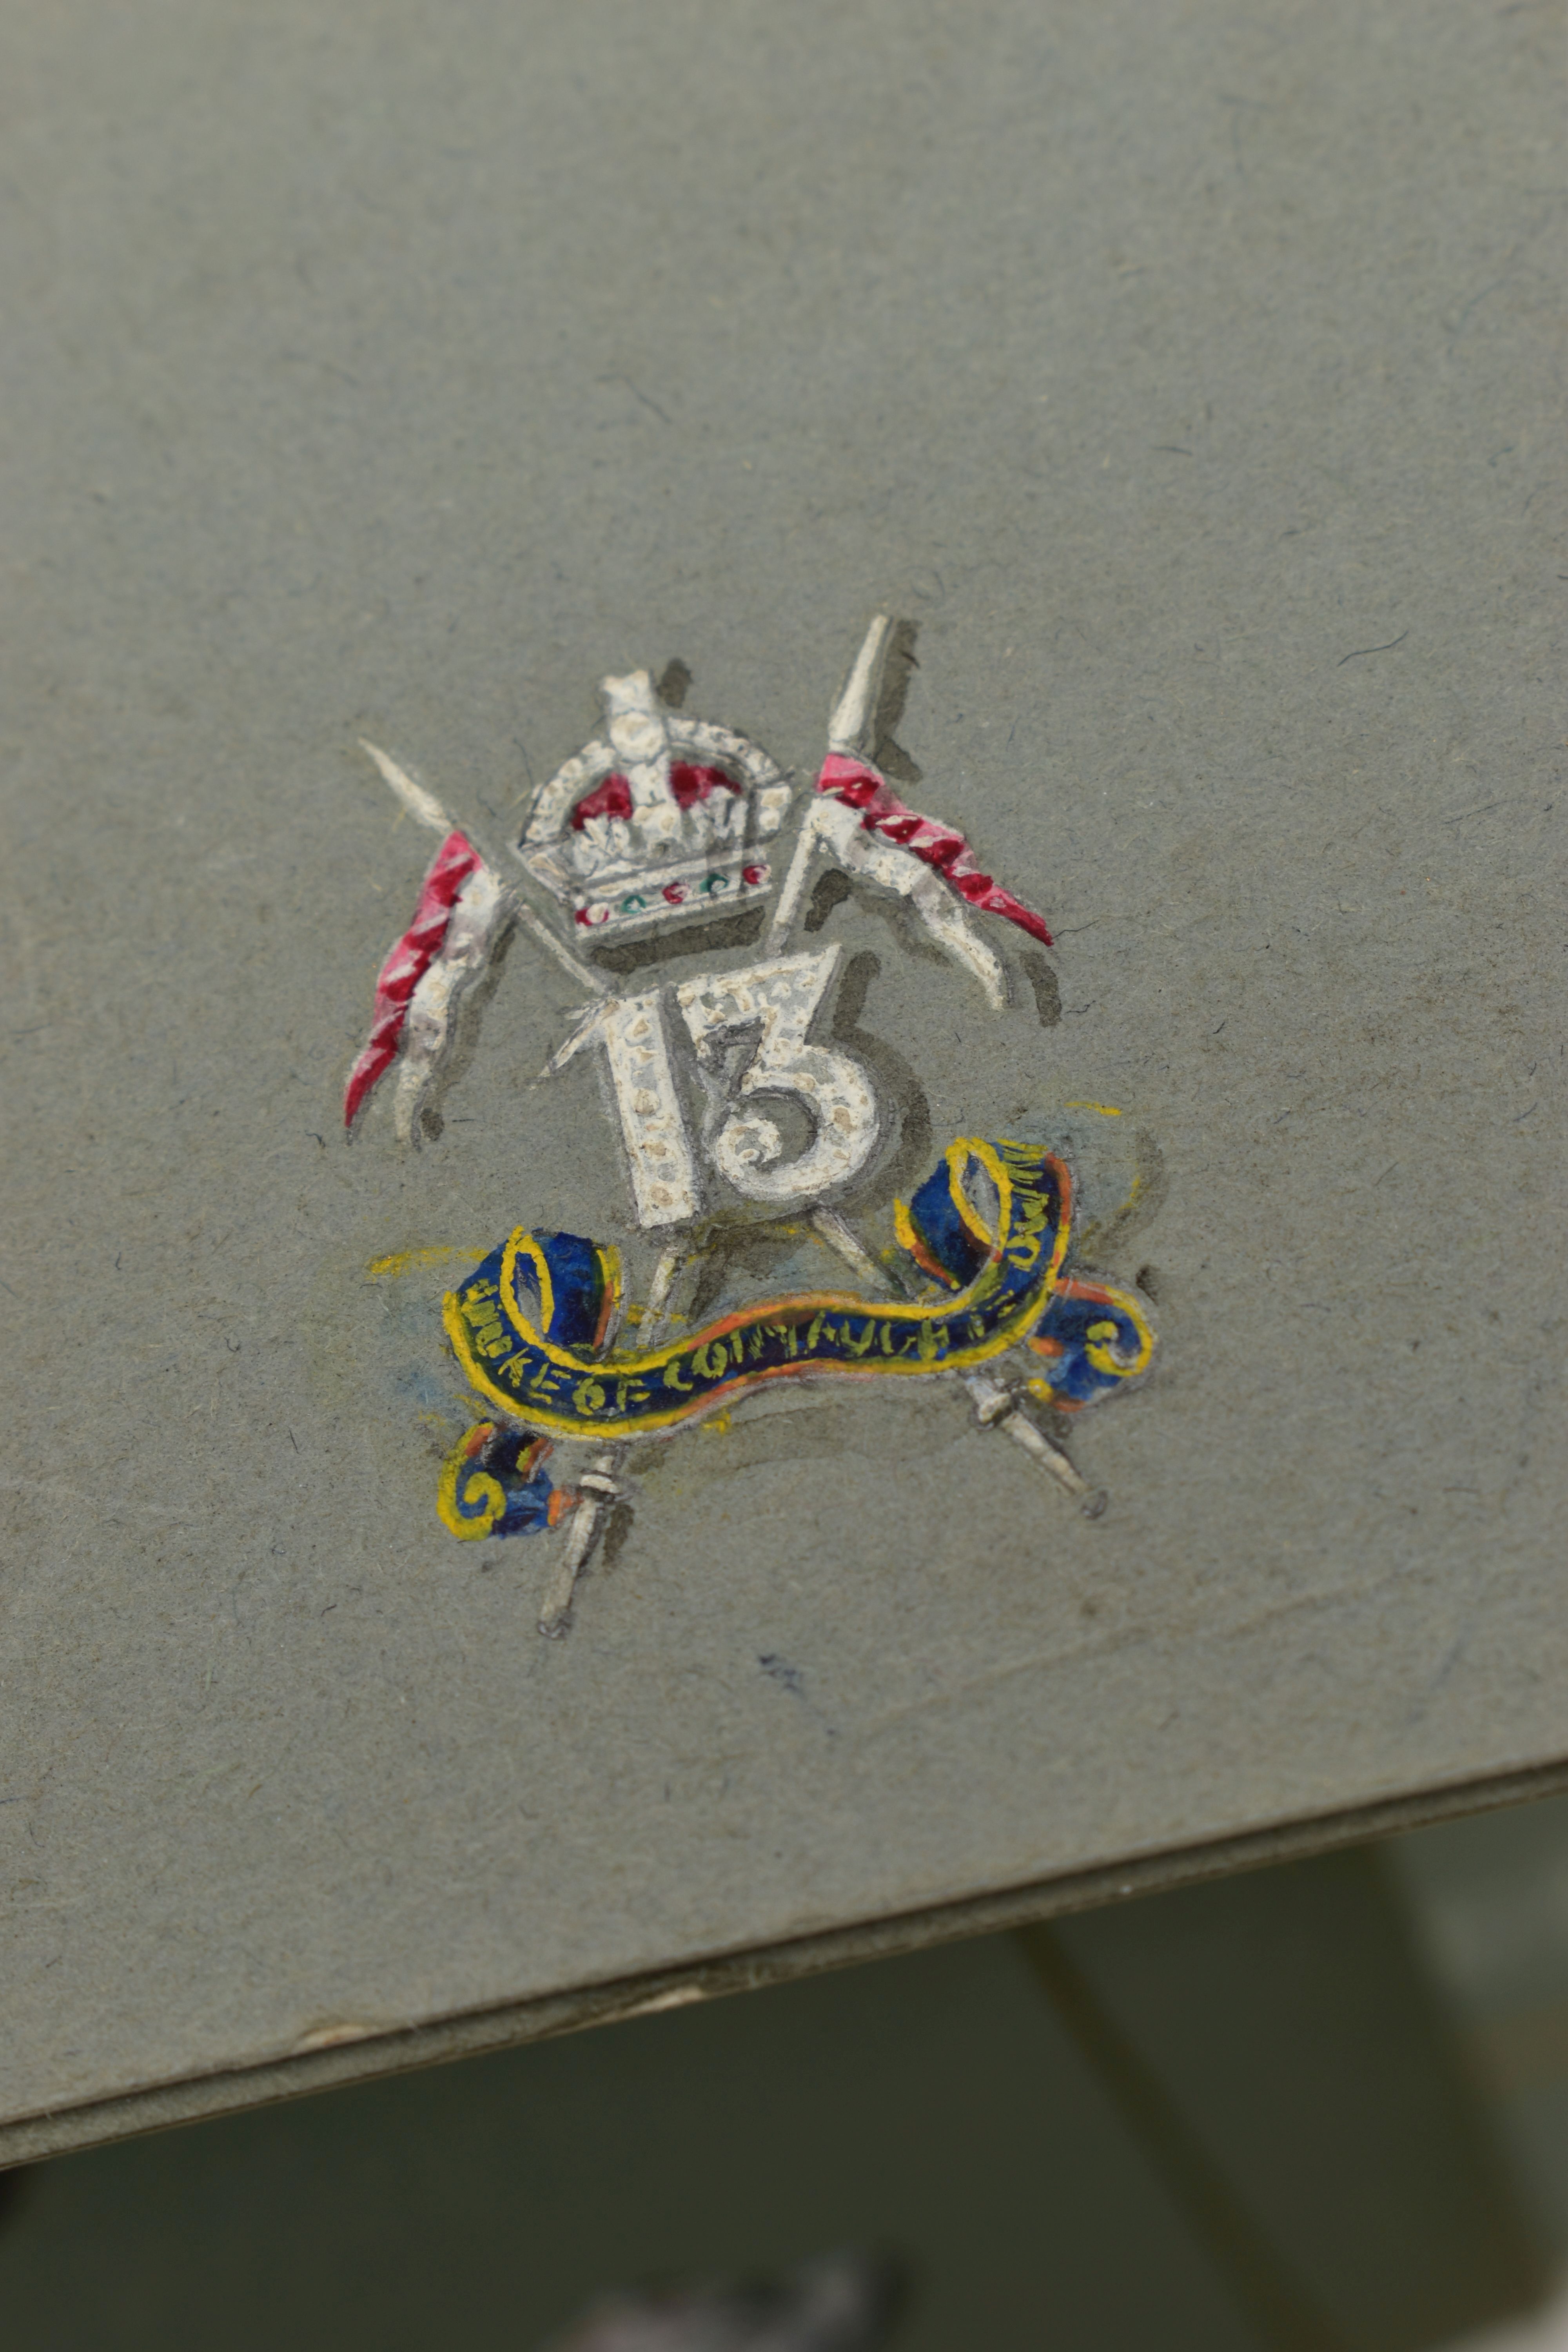 A LARGE COLLECTION OF 'GOLDSMITH & SILVERSMITH CO LTD' EARLY TO MID 20TH CENTURY GOUACHE JEWELLERY - Image 10 of 10